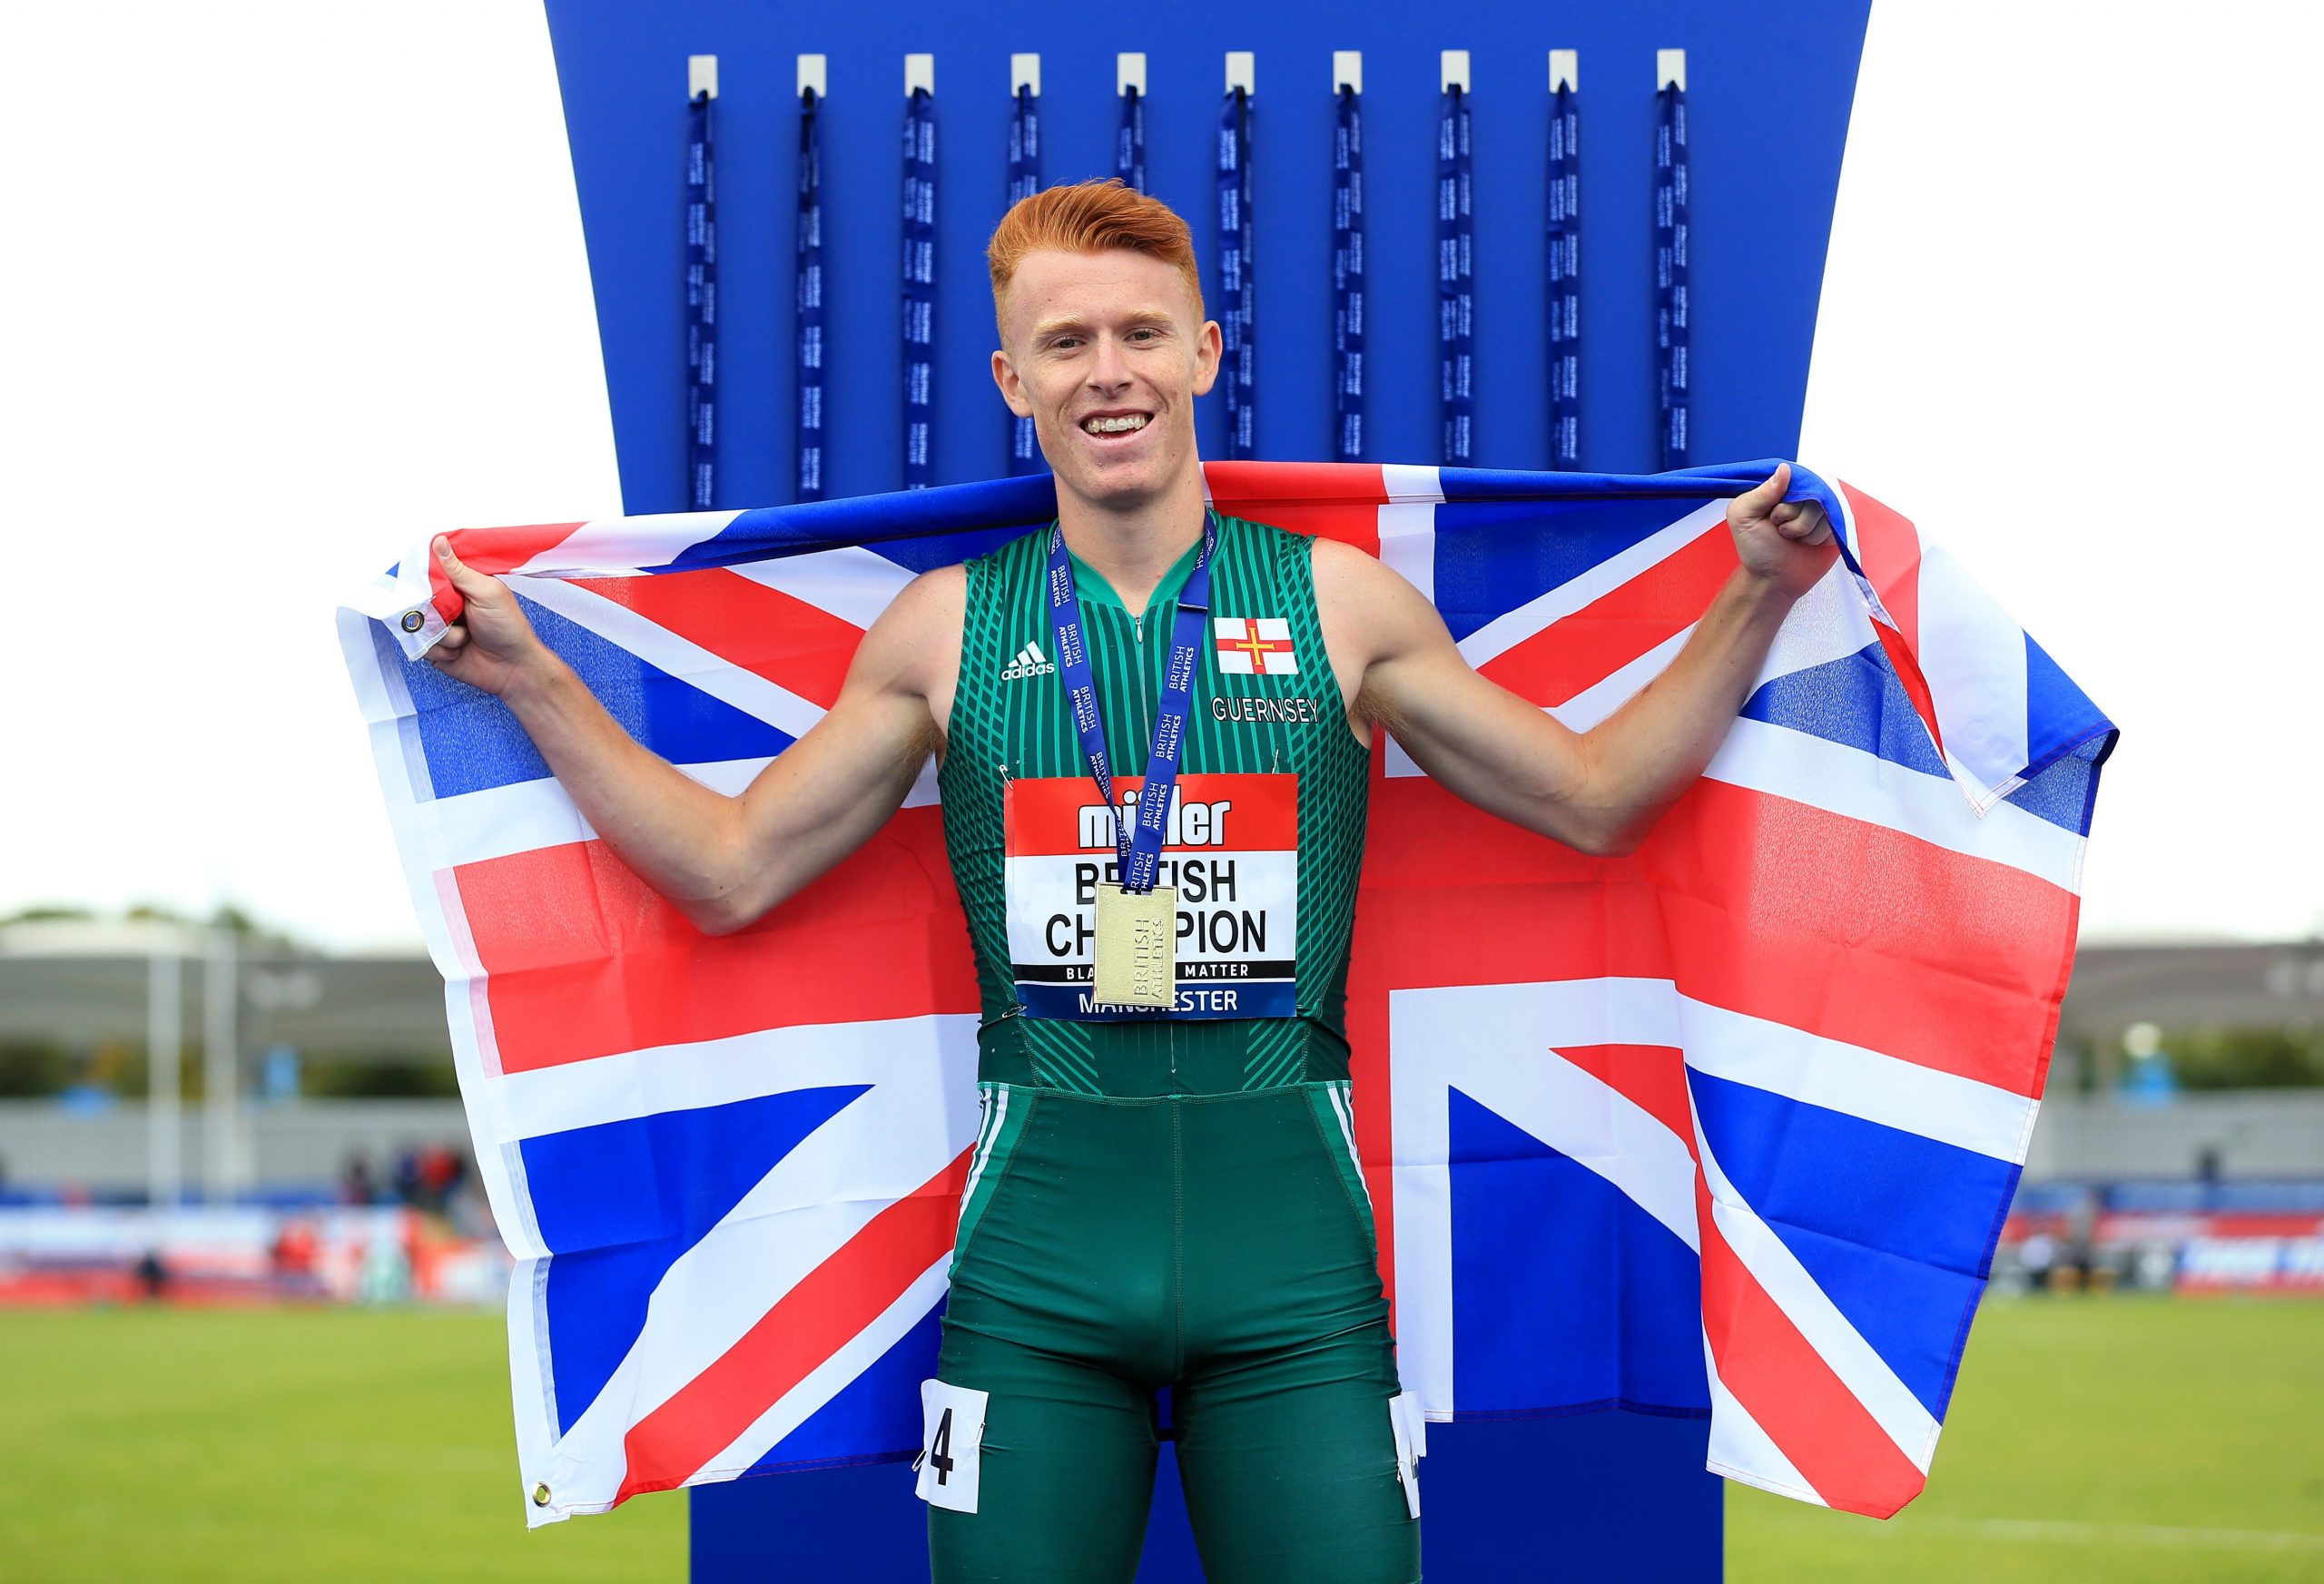 Alastair Chalmers posing at the CommonWealth Games while holding up a GB flag